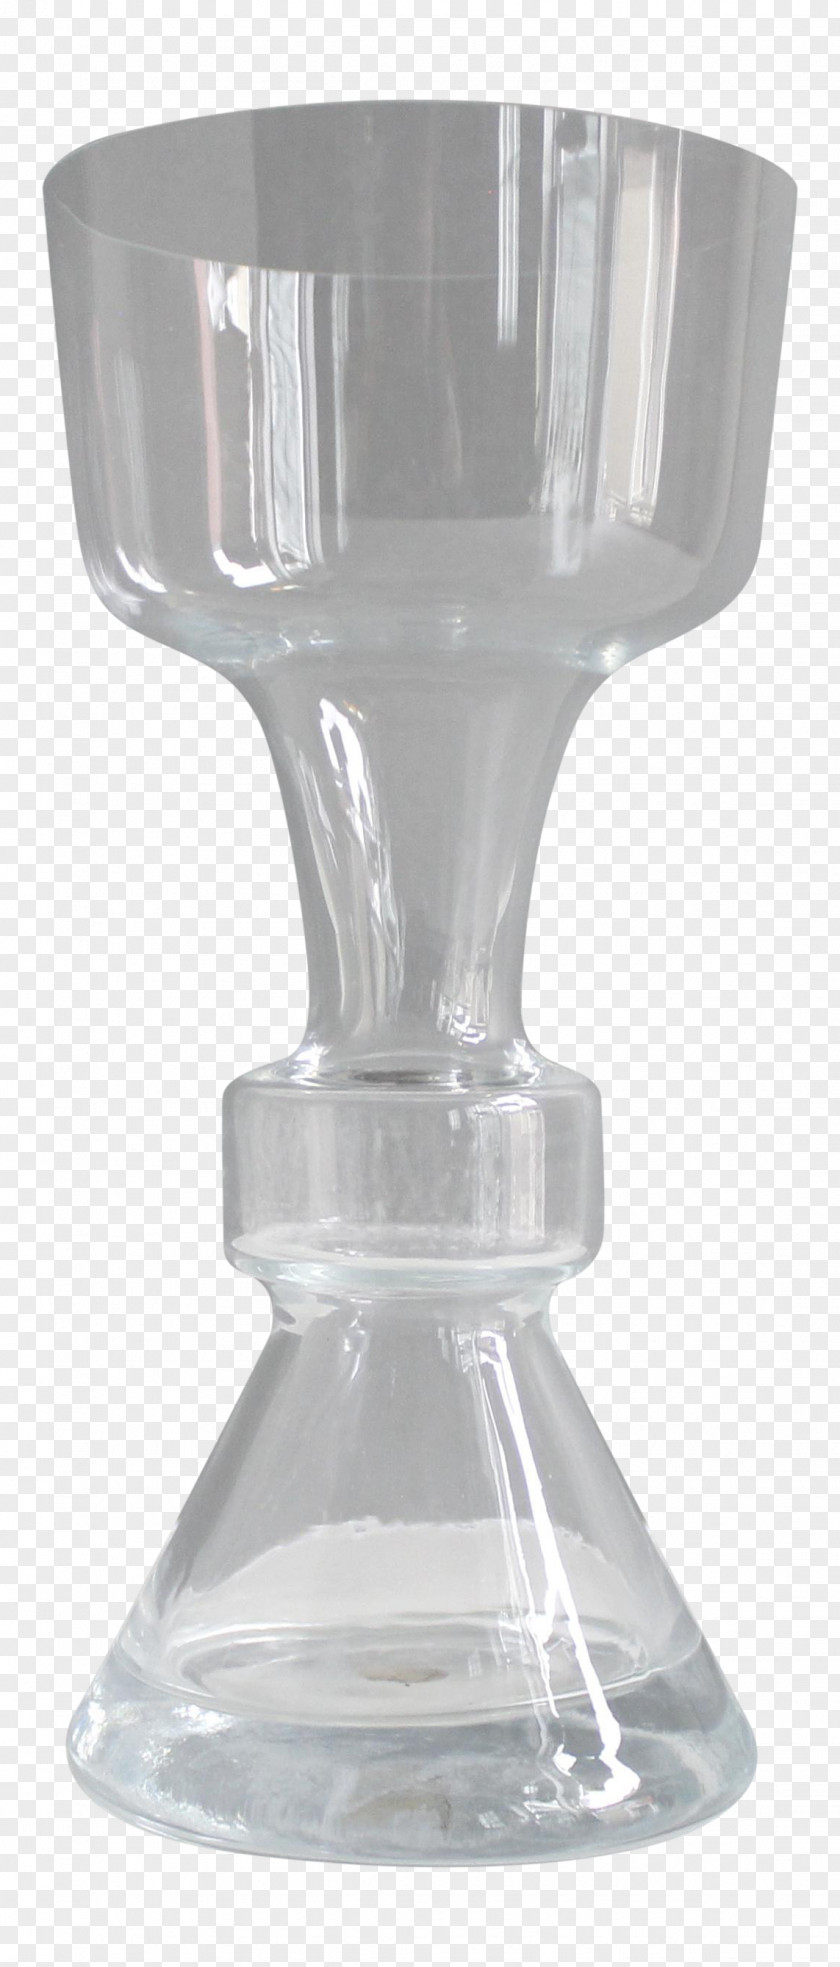 Hourglass Table-glass Tableware Stemware PNG